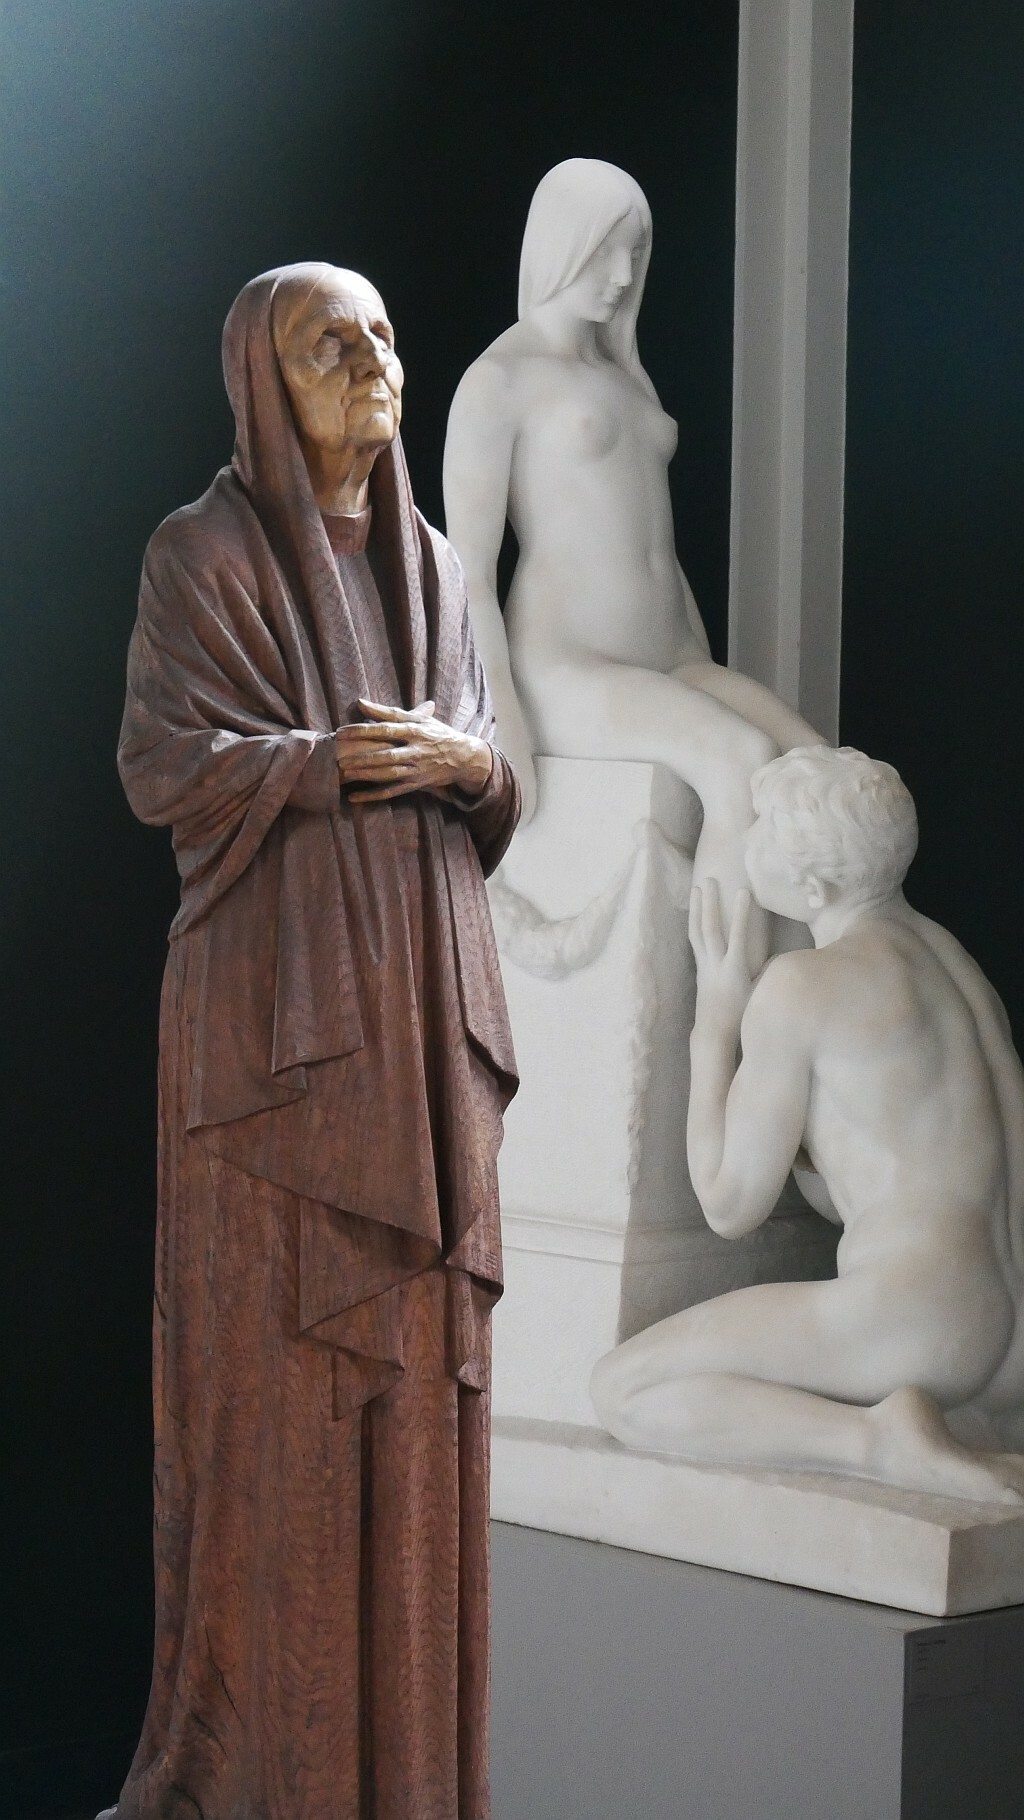 sculpture of old woman with folded hands in the foreground. sculpture of nude couple in the background.